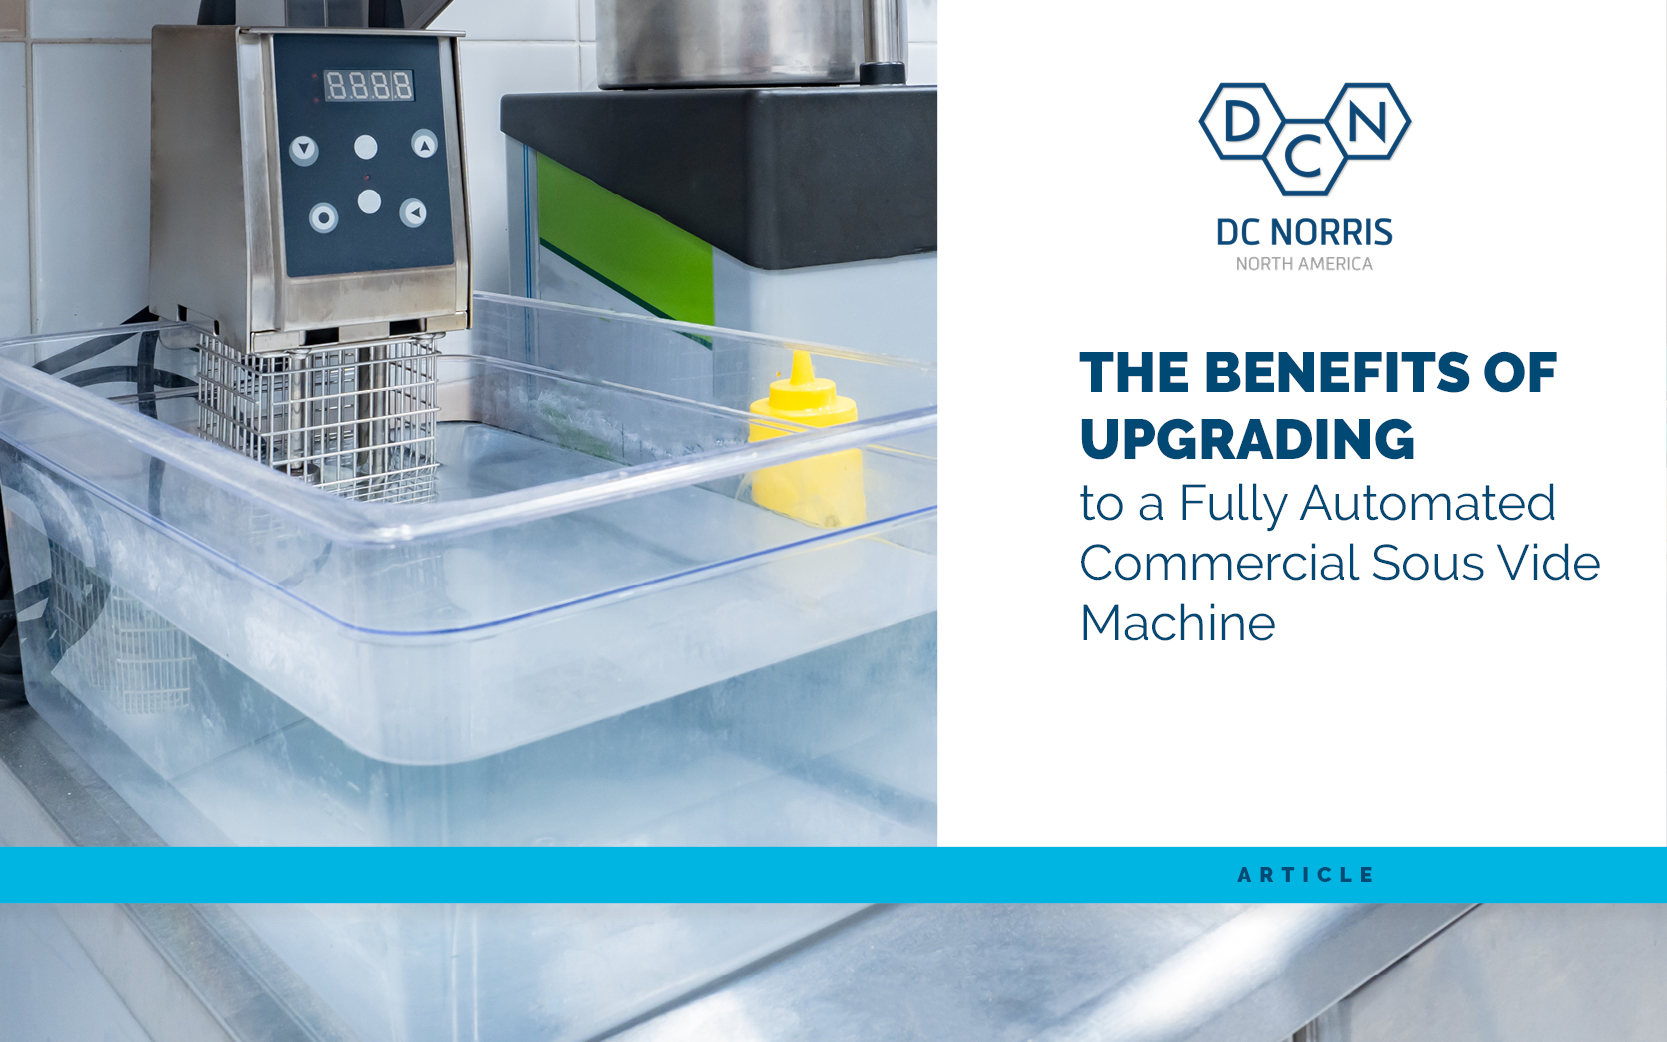 Considering a Commercial Sous Vide Machine? Here Are the Benefits.